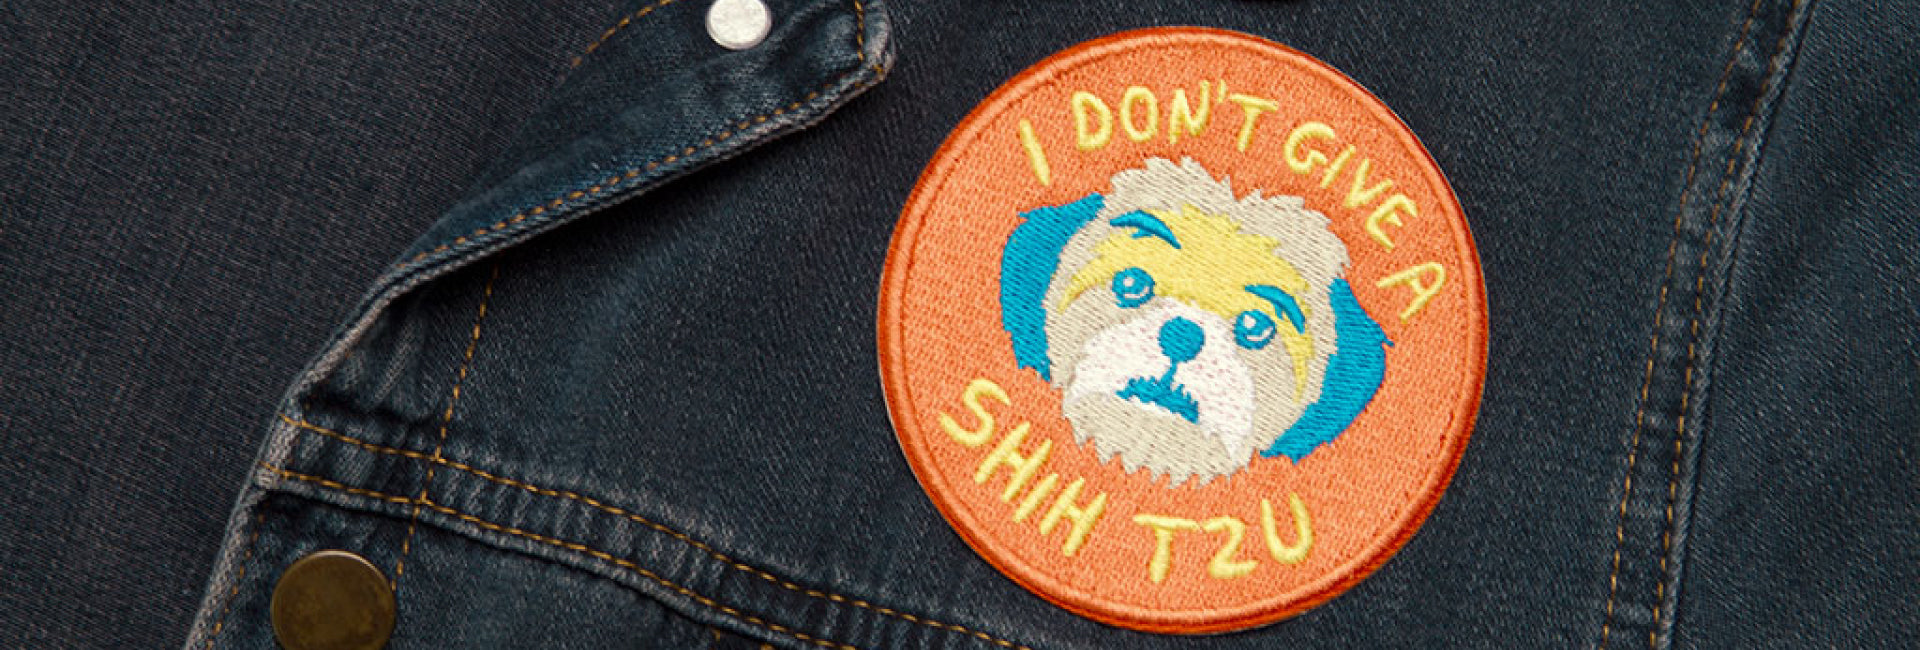 I Don't Give a Shih Tzu | Patch